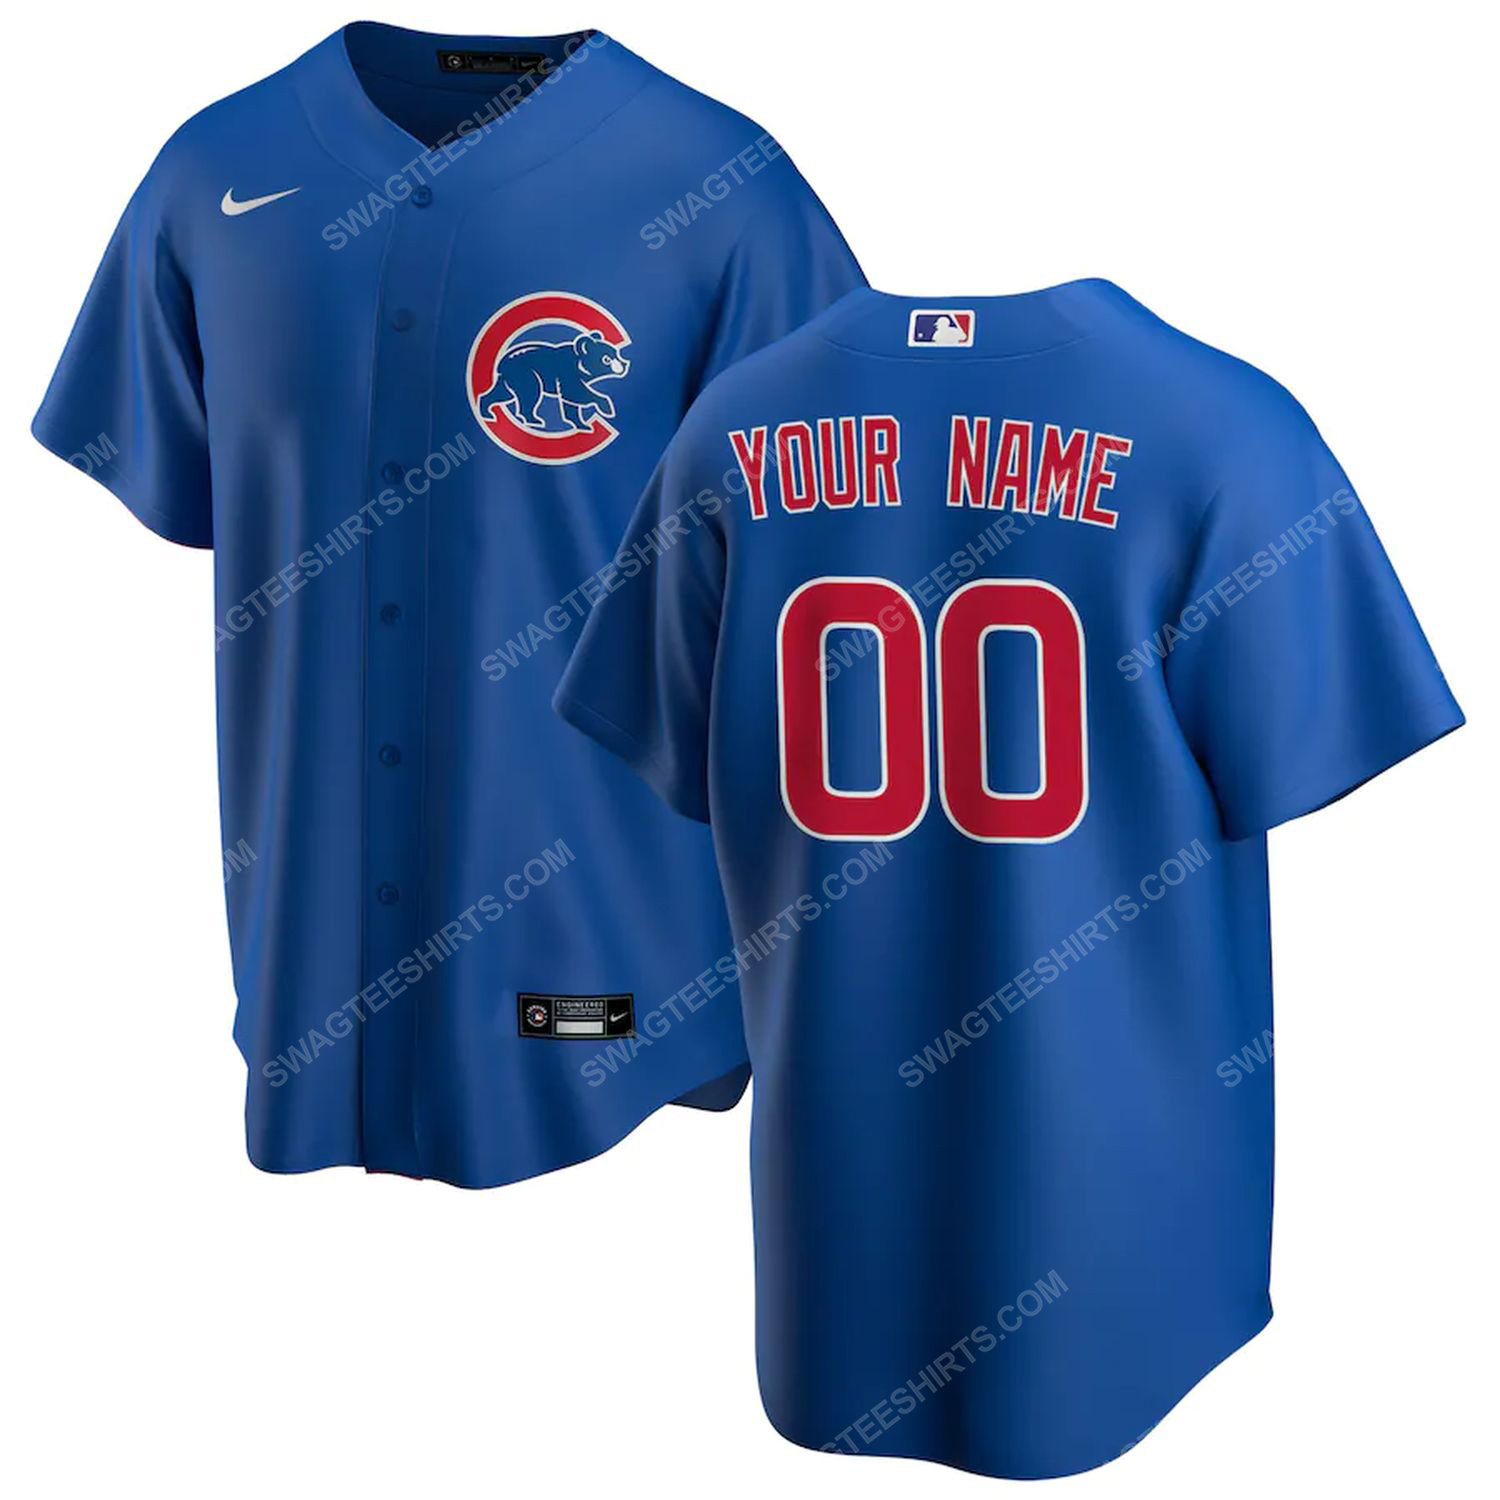 Personalized mlb chicago cubs baseball jersey-royal